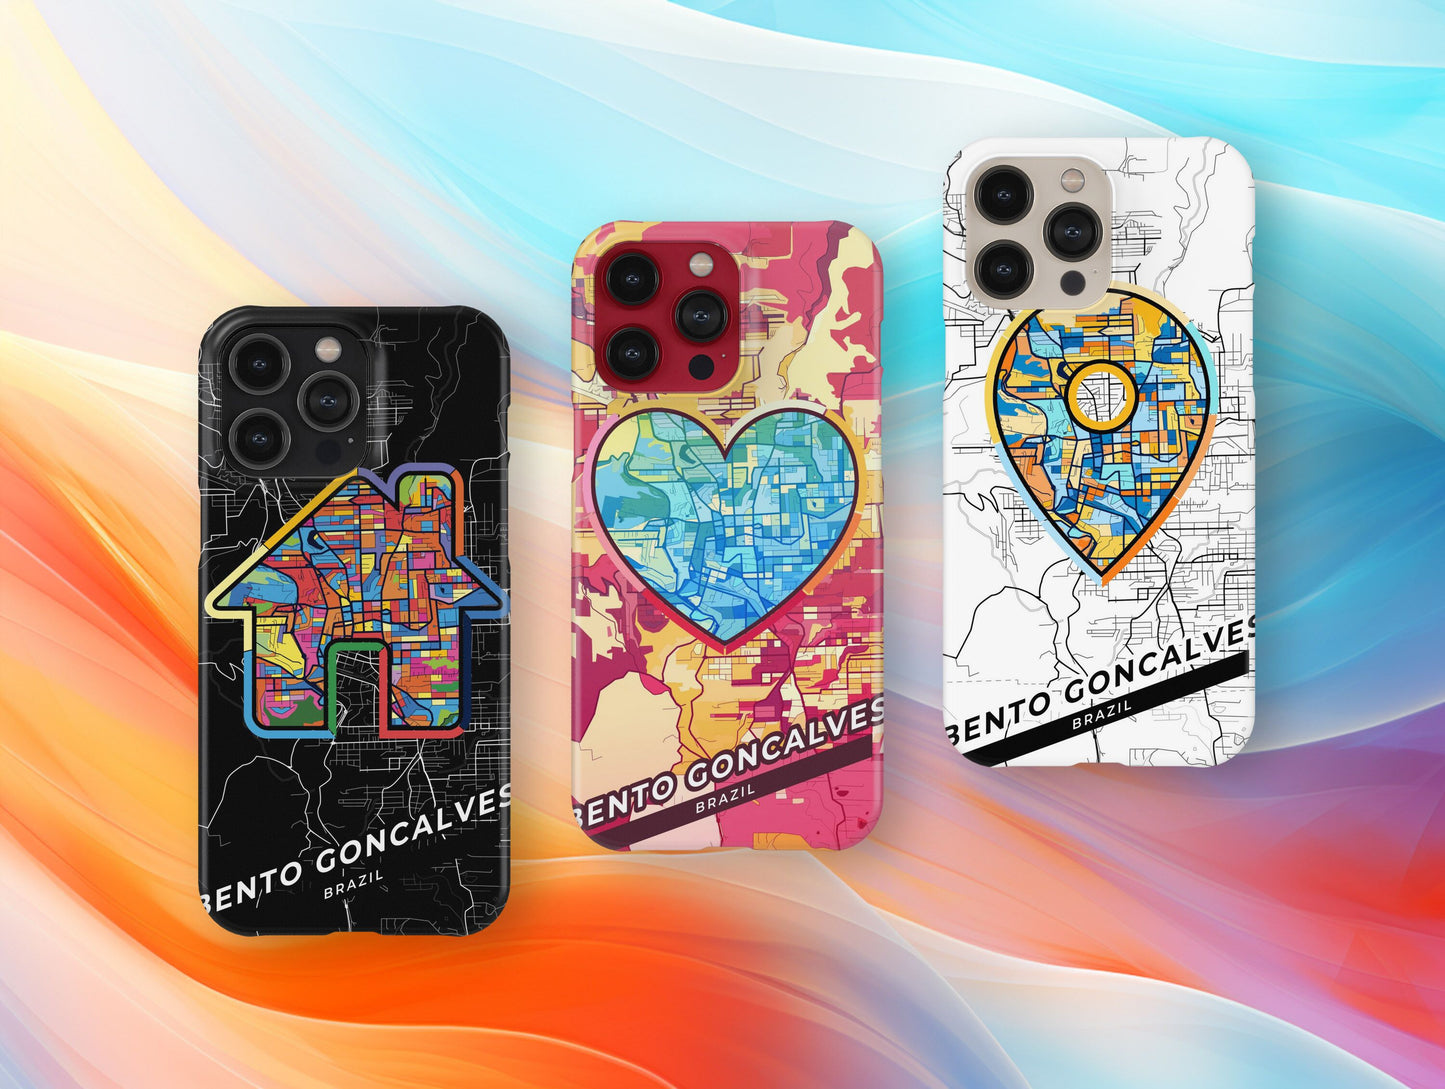 Bento Goncalves Brazil slim phone case with colorful icon. Birthday, wedding or housewarming gift. Couple match cases.